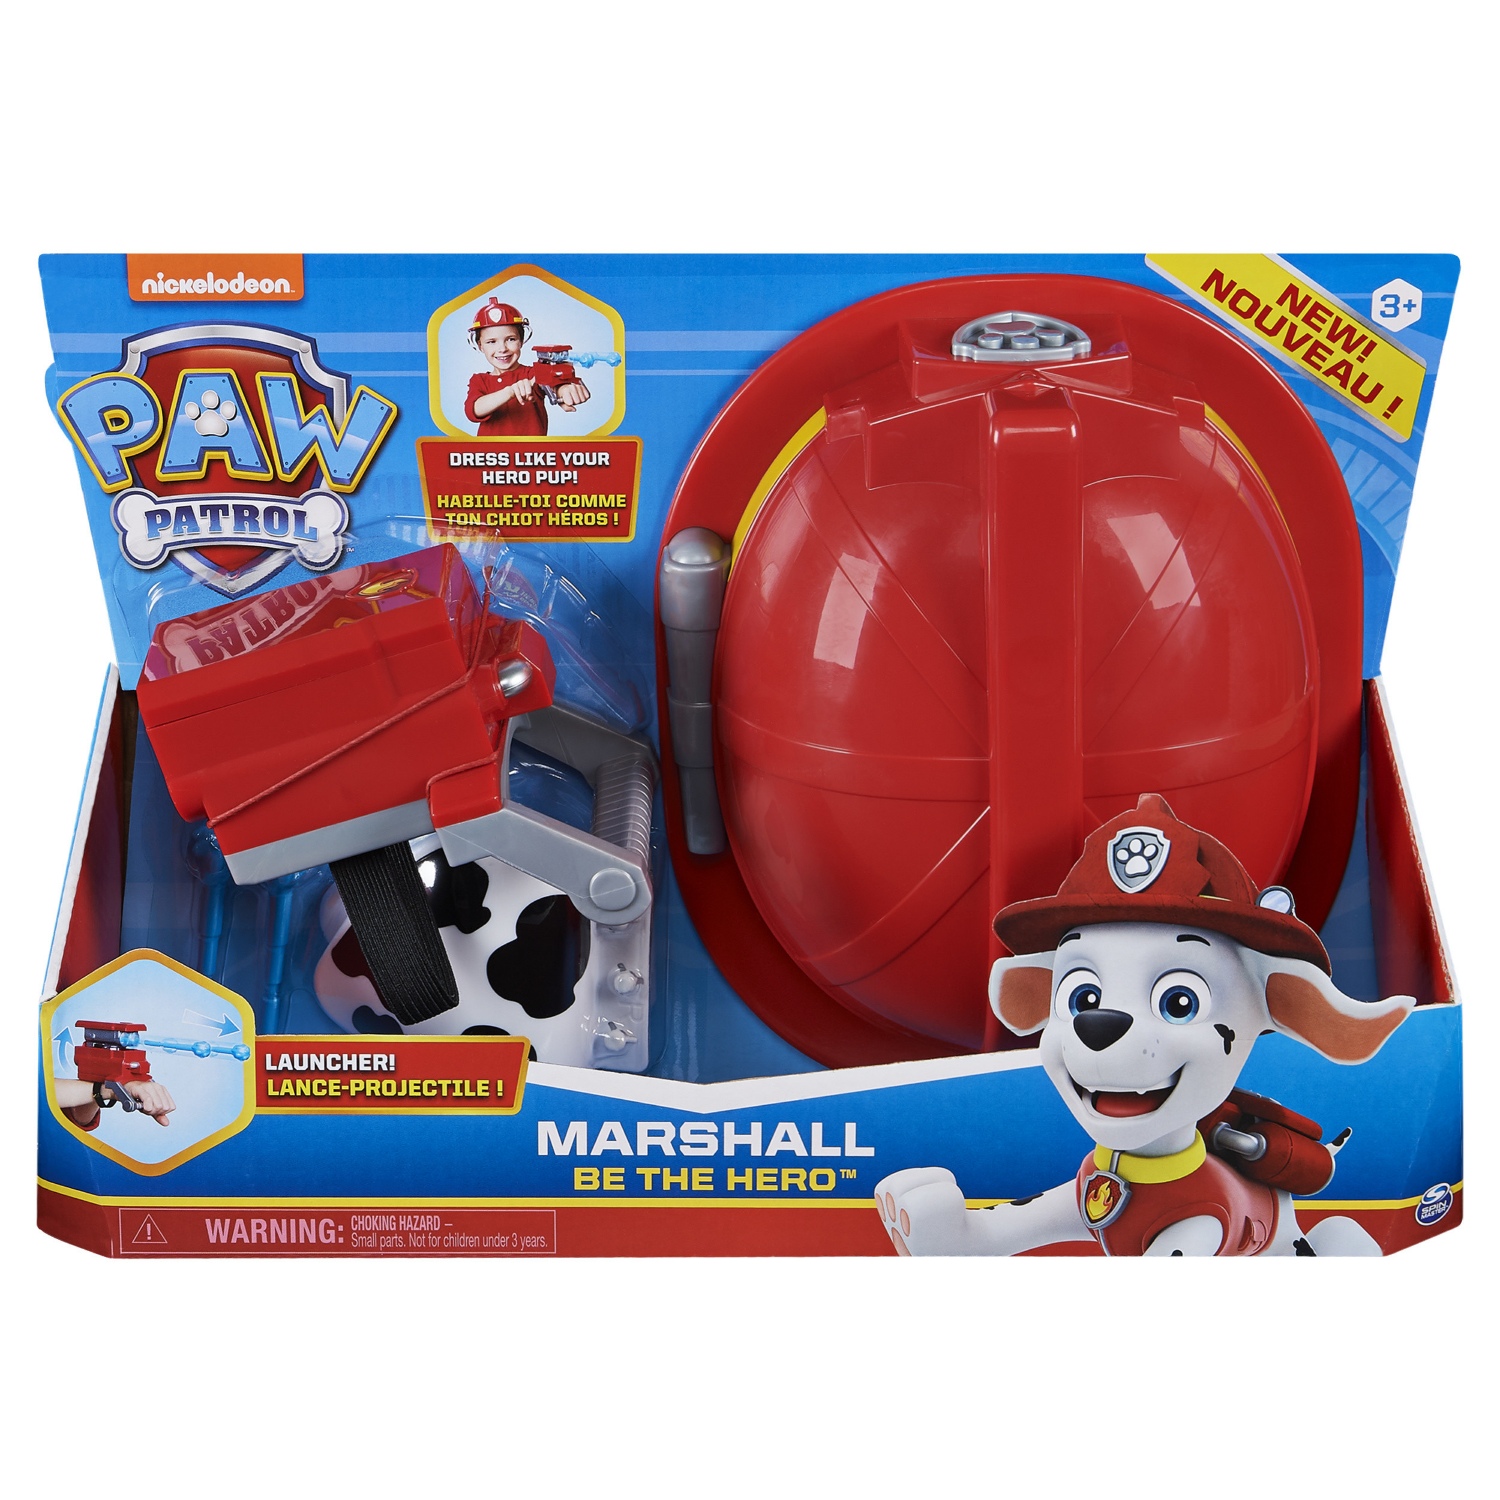 PAW PATROL ROLE PLAY BE THE HERO PUP ASSORTI